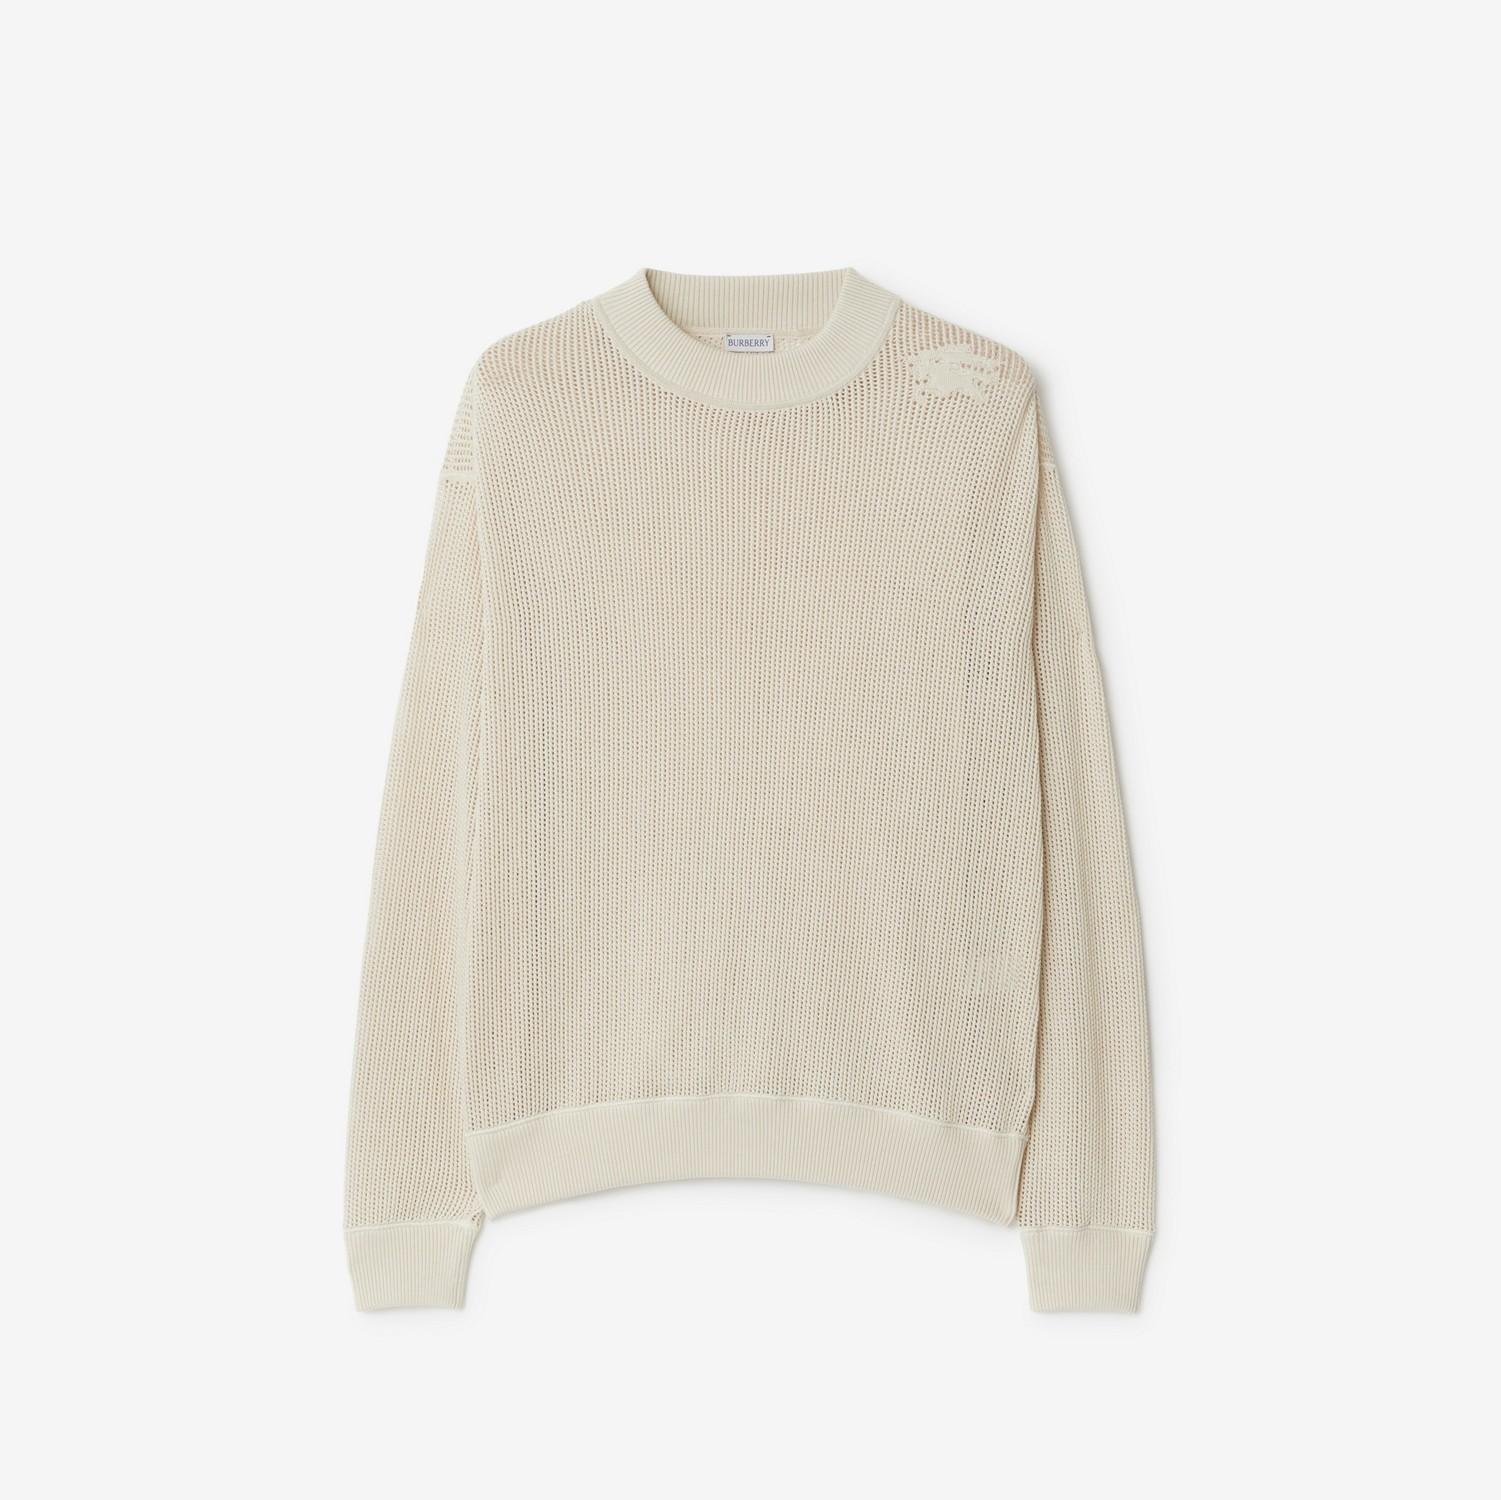 Cotton Mesh Sweater by BURBERRY